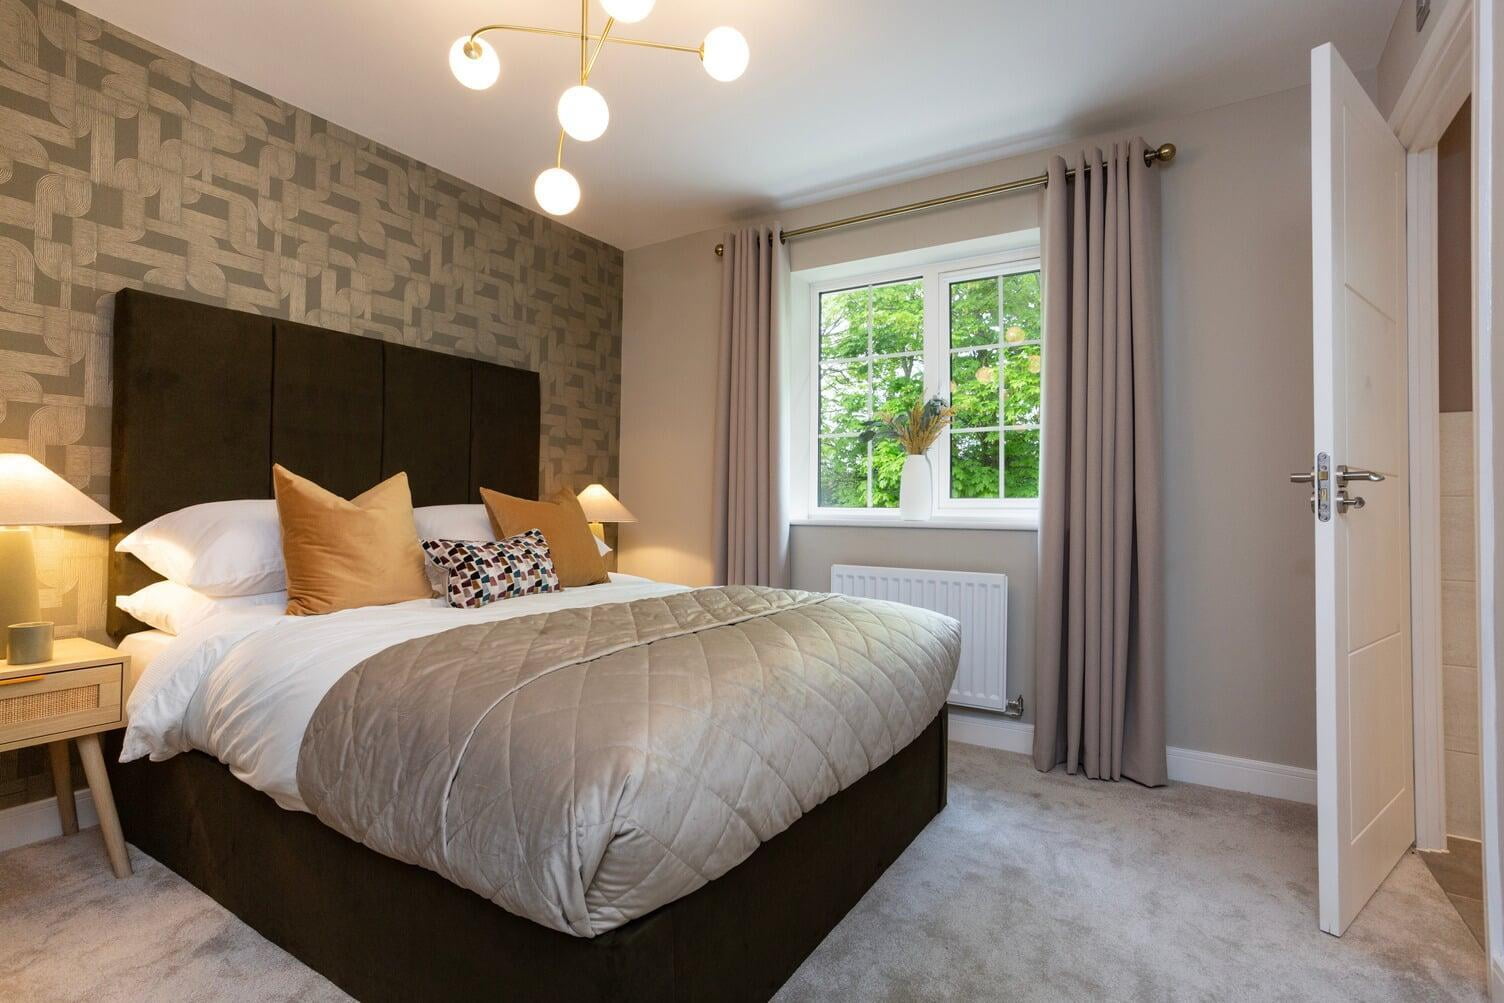 Home Reach Flex shared ownership example room The Oaks